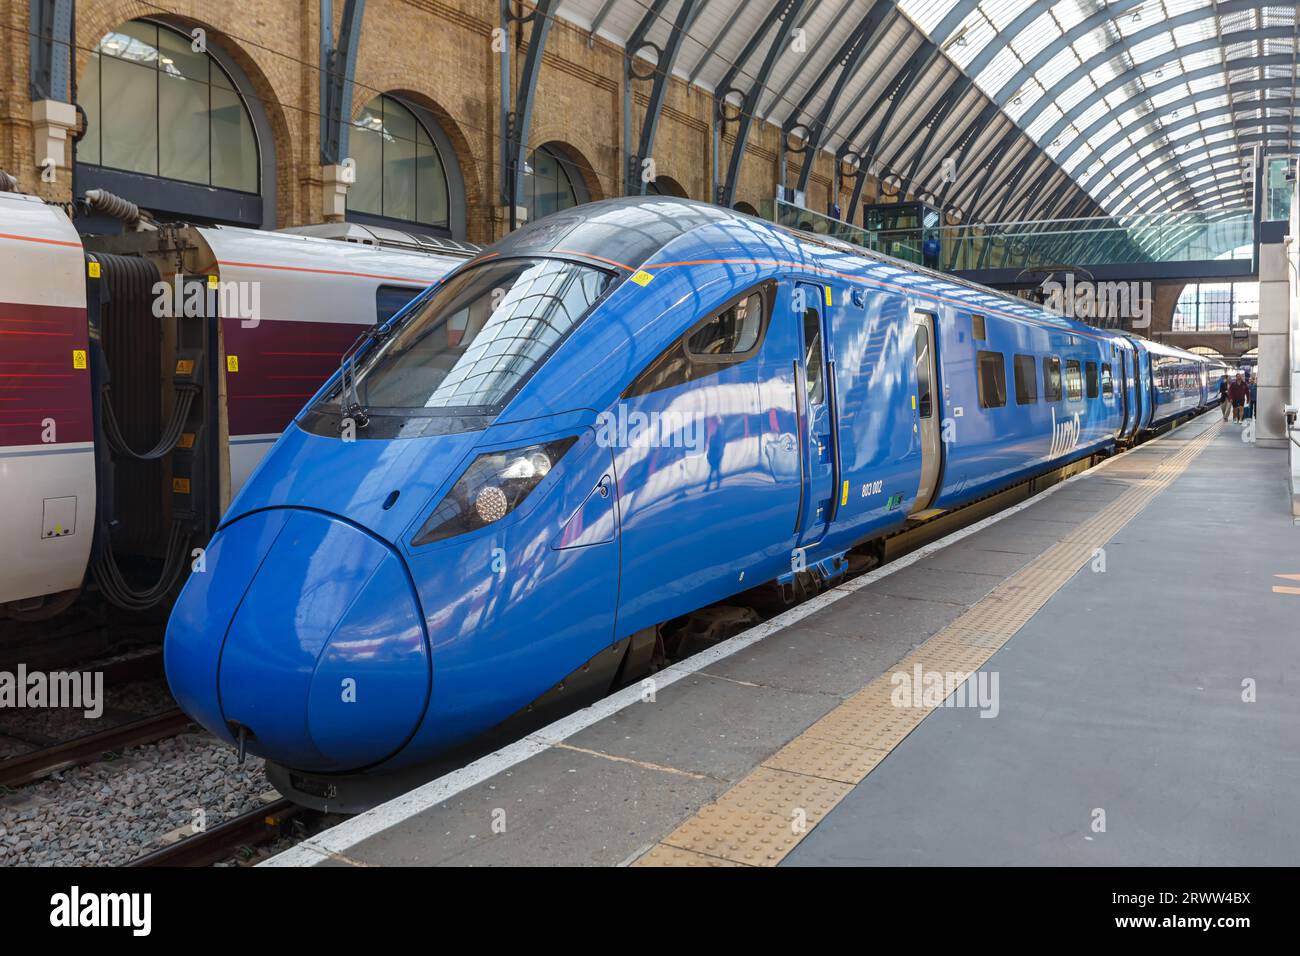 London, United Kingdom - April 29, 2023: Lumo high speed train of FirstGroup at King's Cross train station in London, United Kingdom. Stock Photo